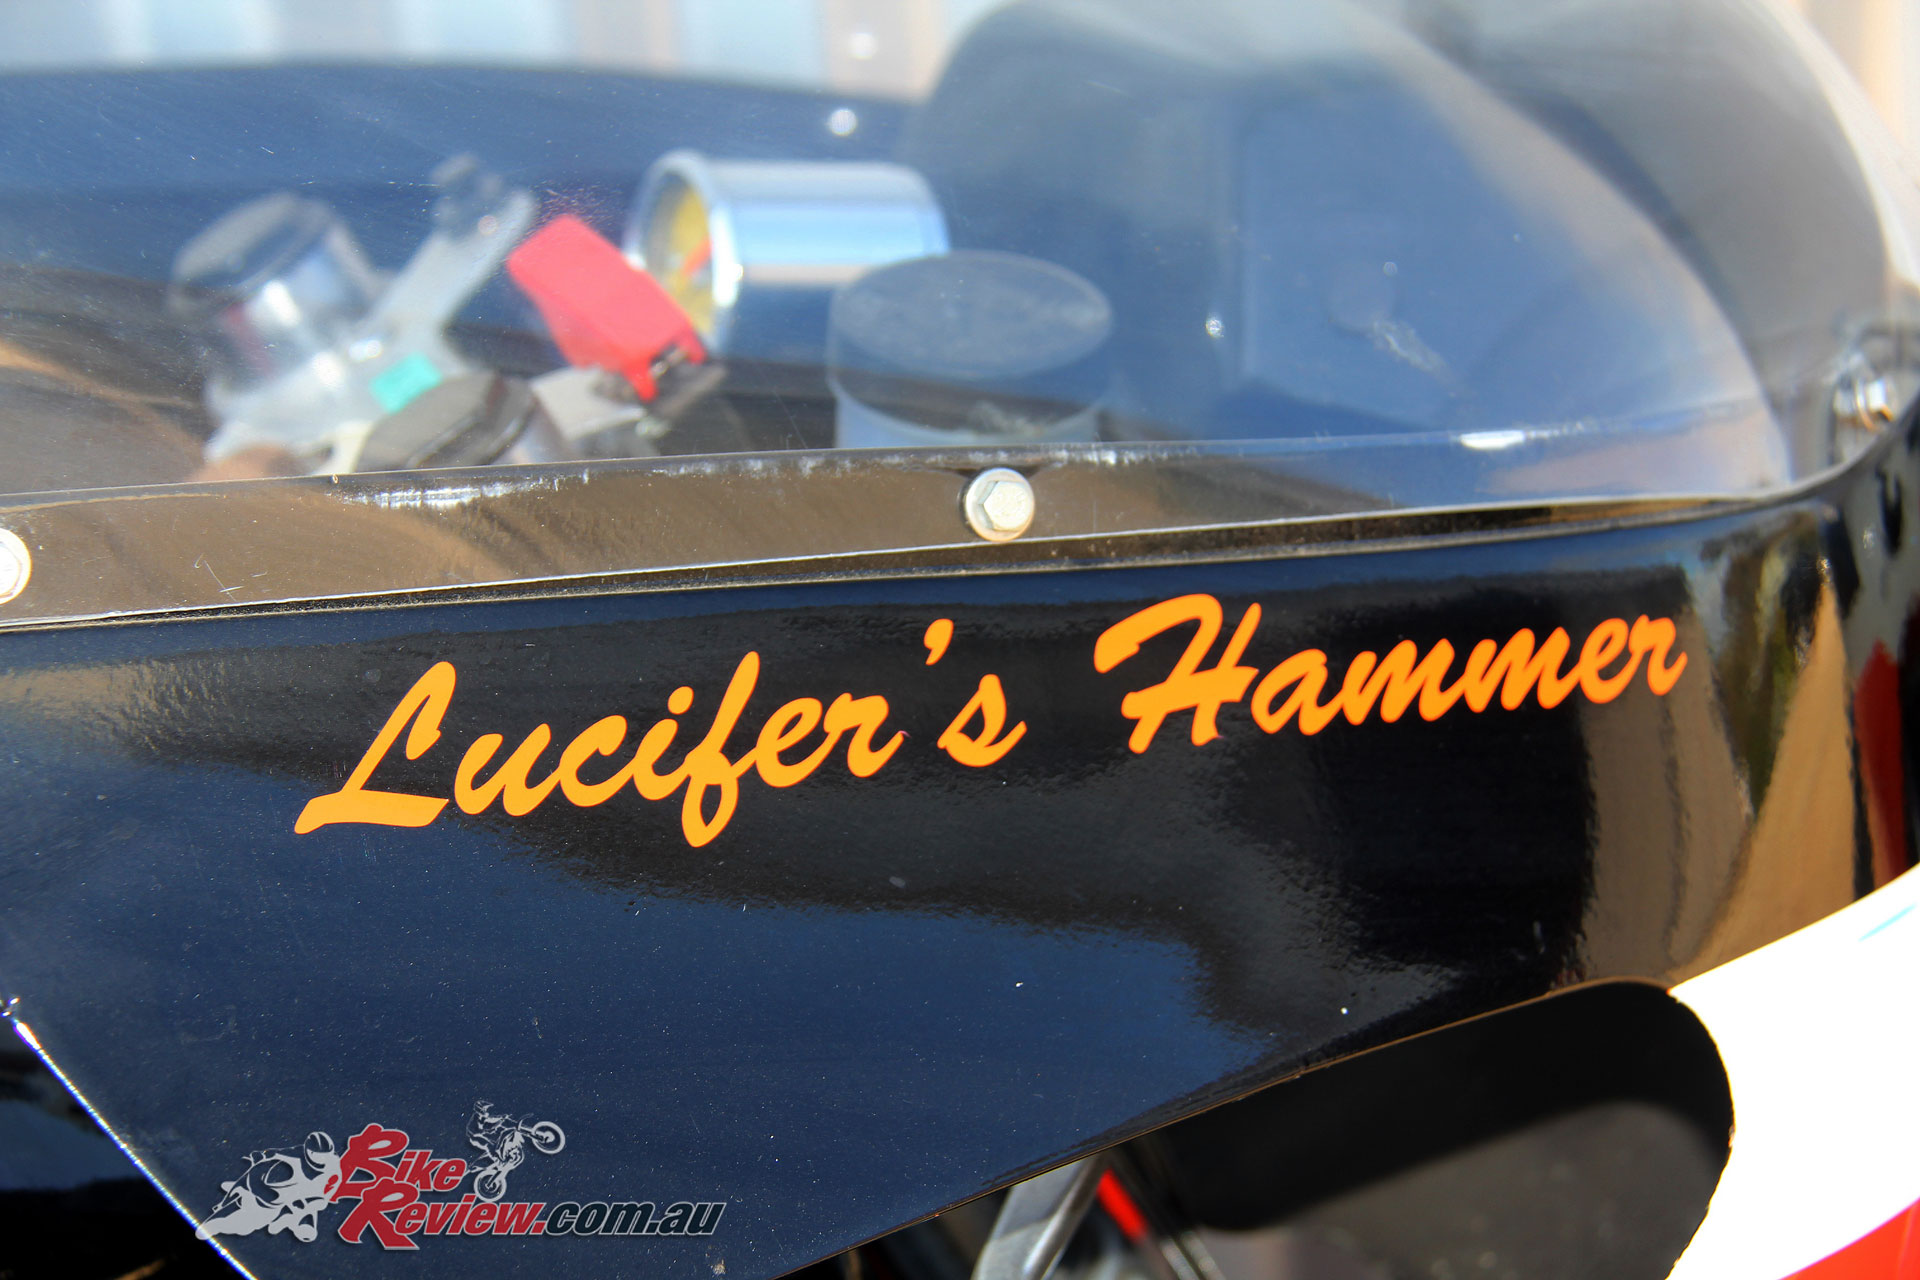 The XR 1000 race machine was known as 'Lucifer's Hammer'